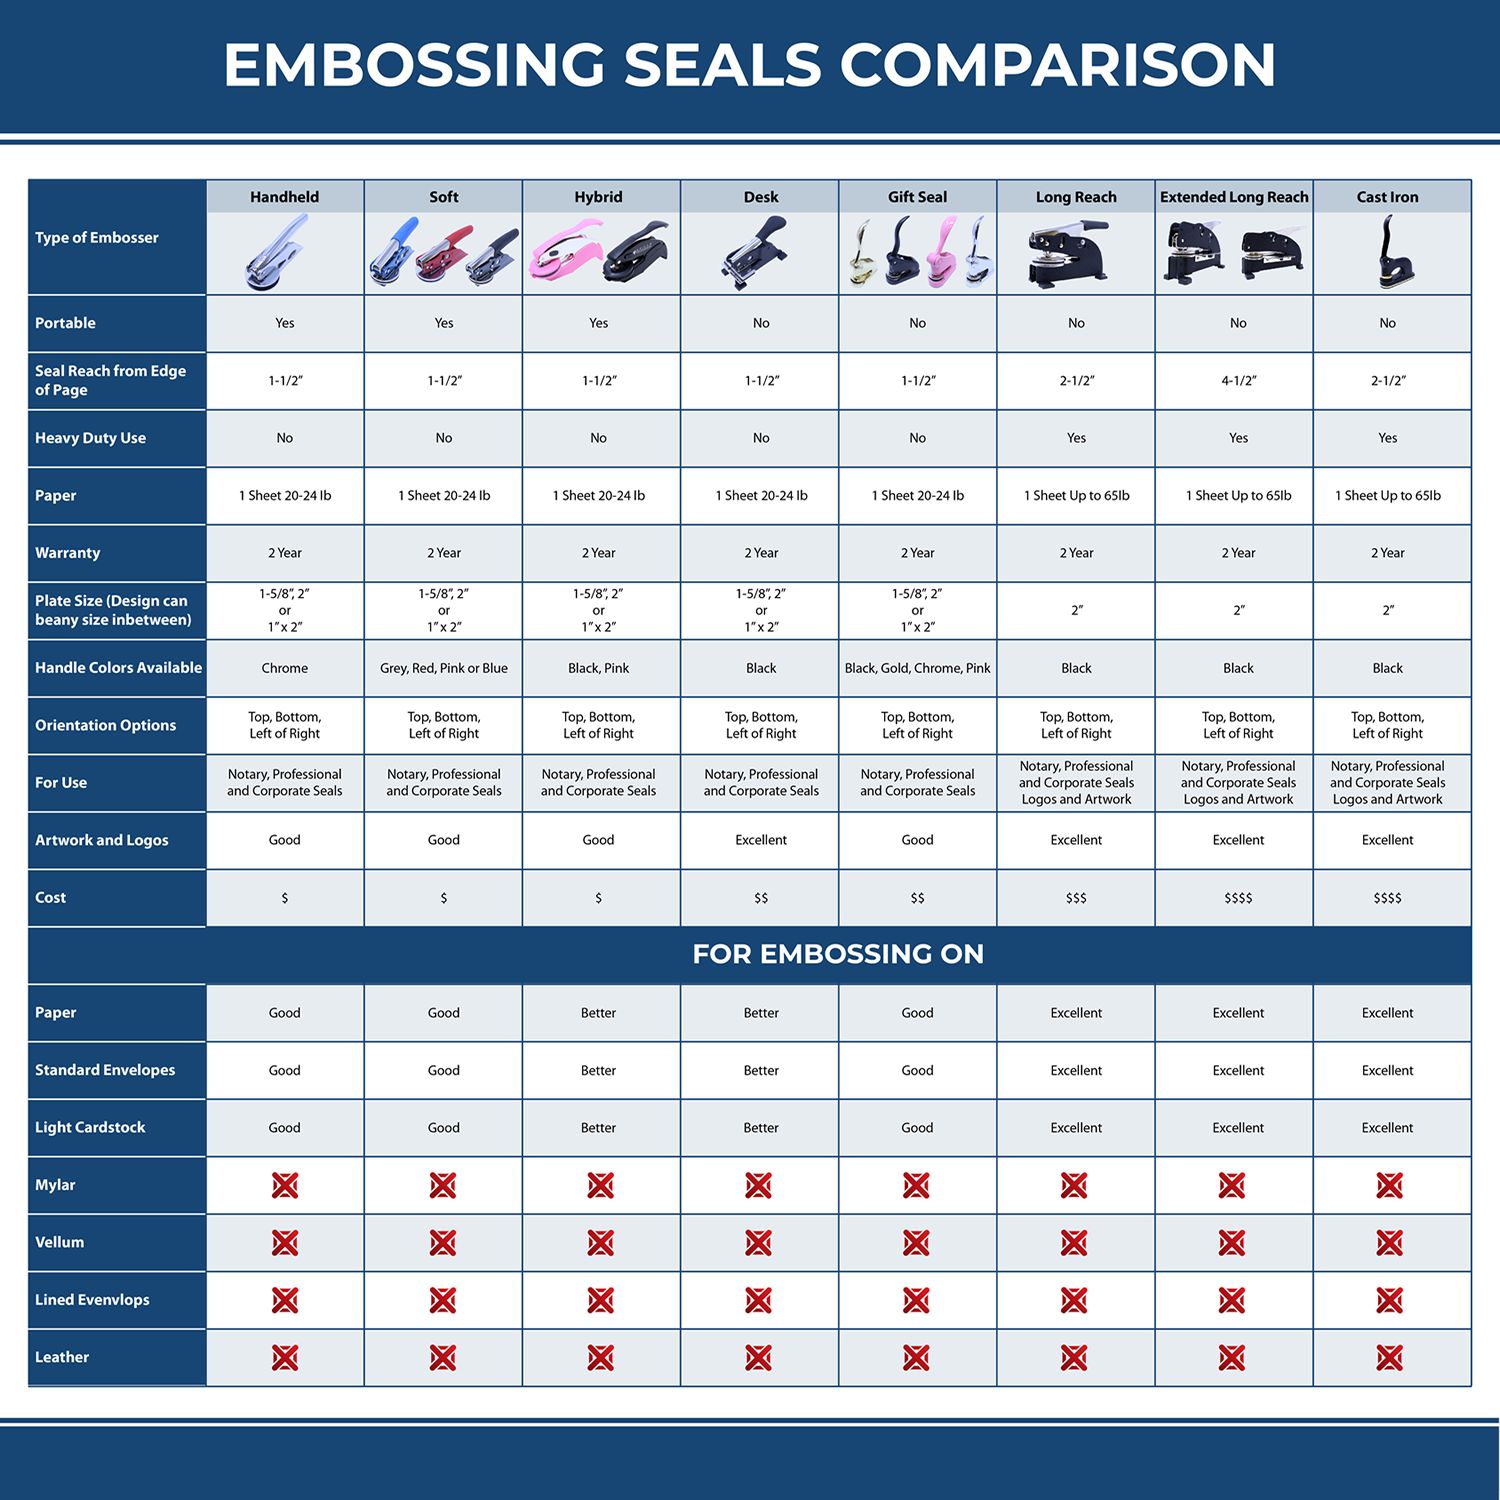 A comparison chart for the different types of mount models available for the Heavy Duty Cast Iron North Dakota Land Surveyor Seal Embosser.